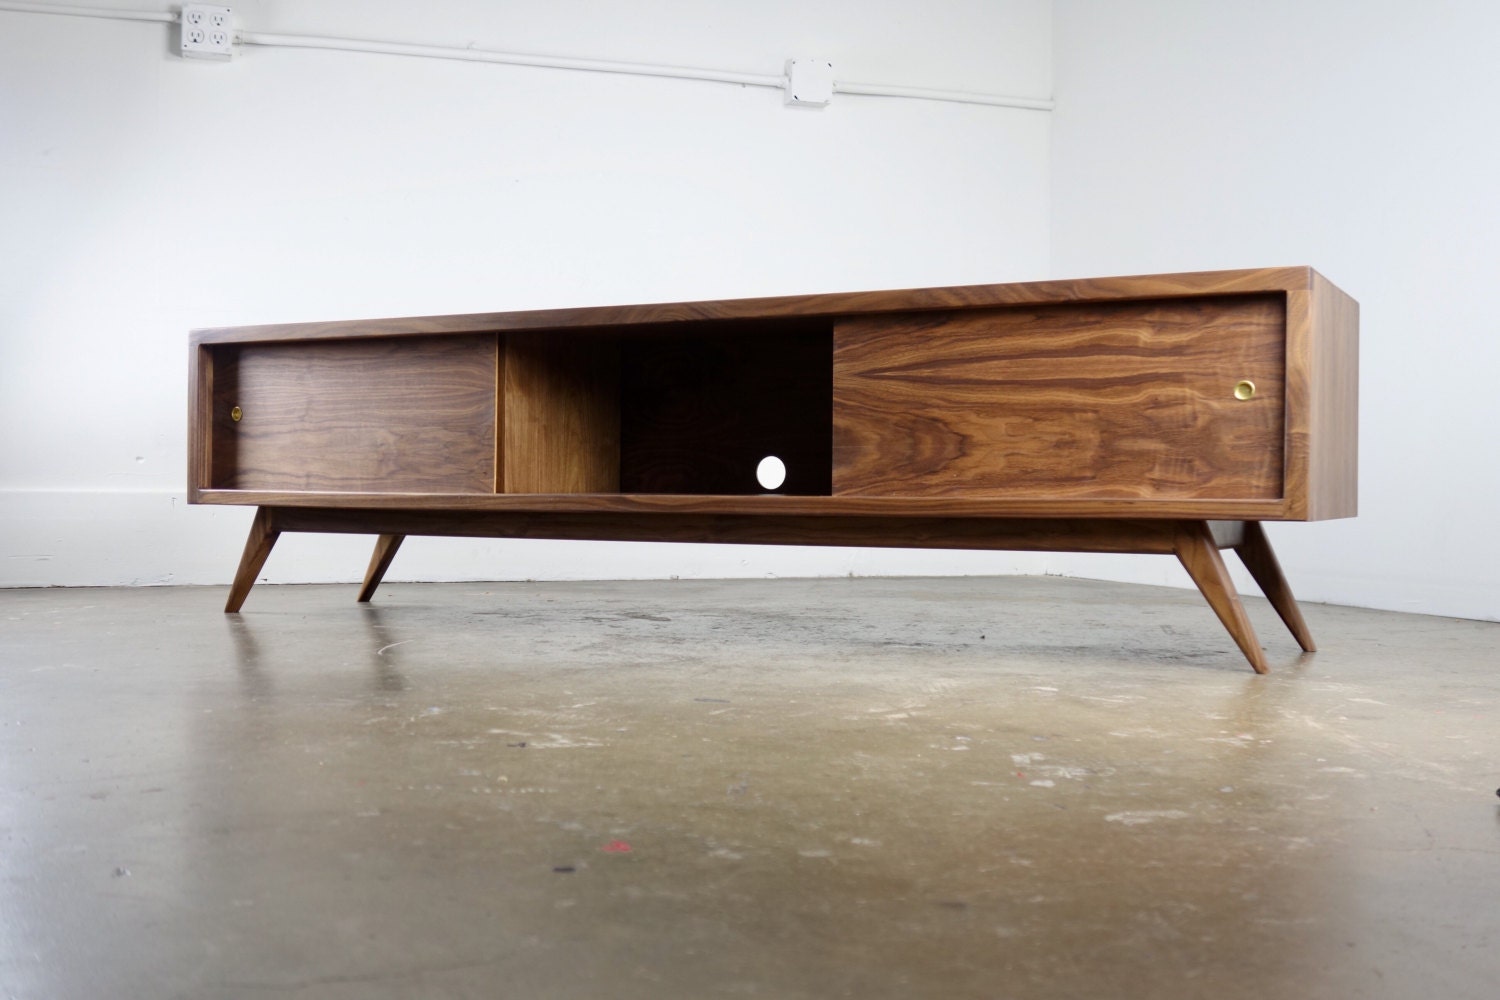 The G3 a mid century modern TV console TV stand